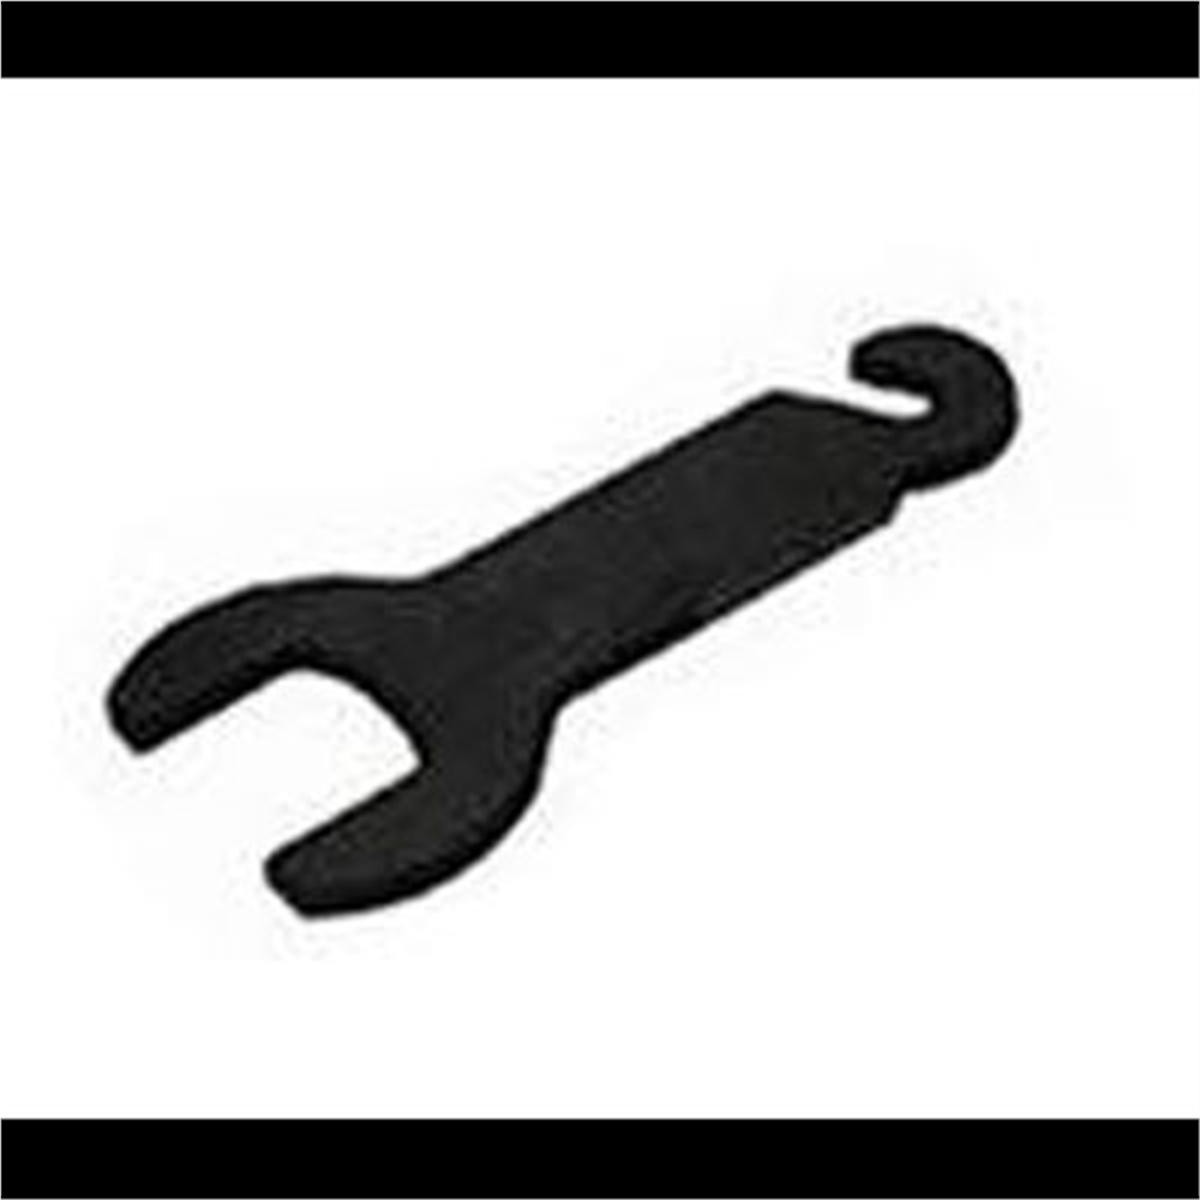 Driving Wrench 1-7/8 Inch